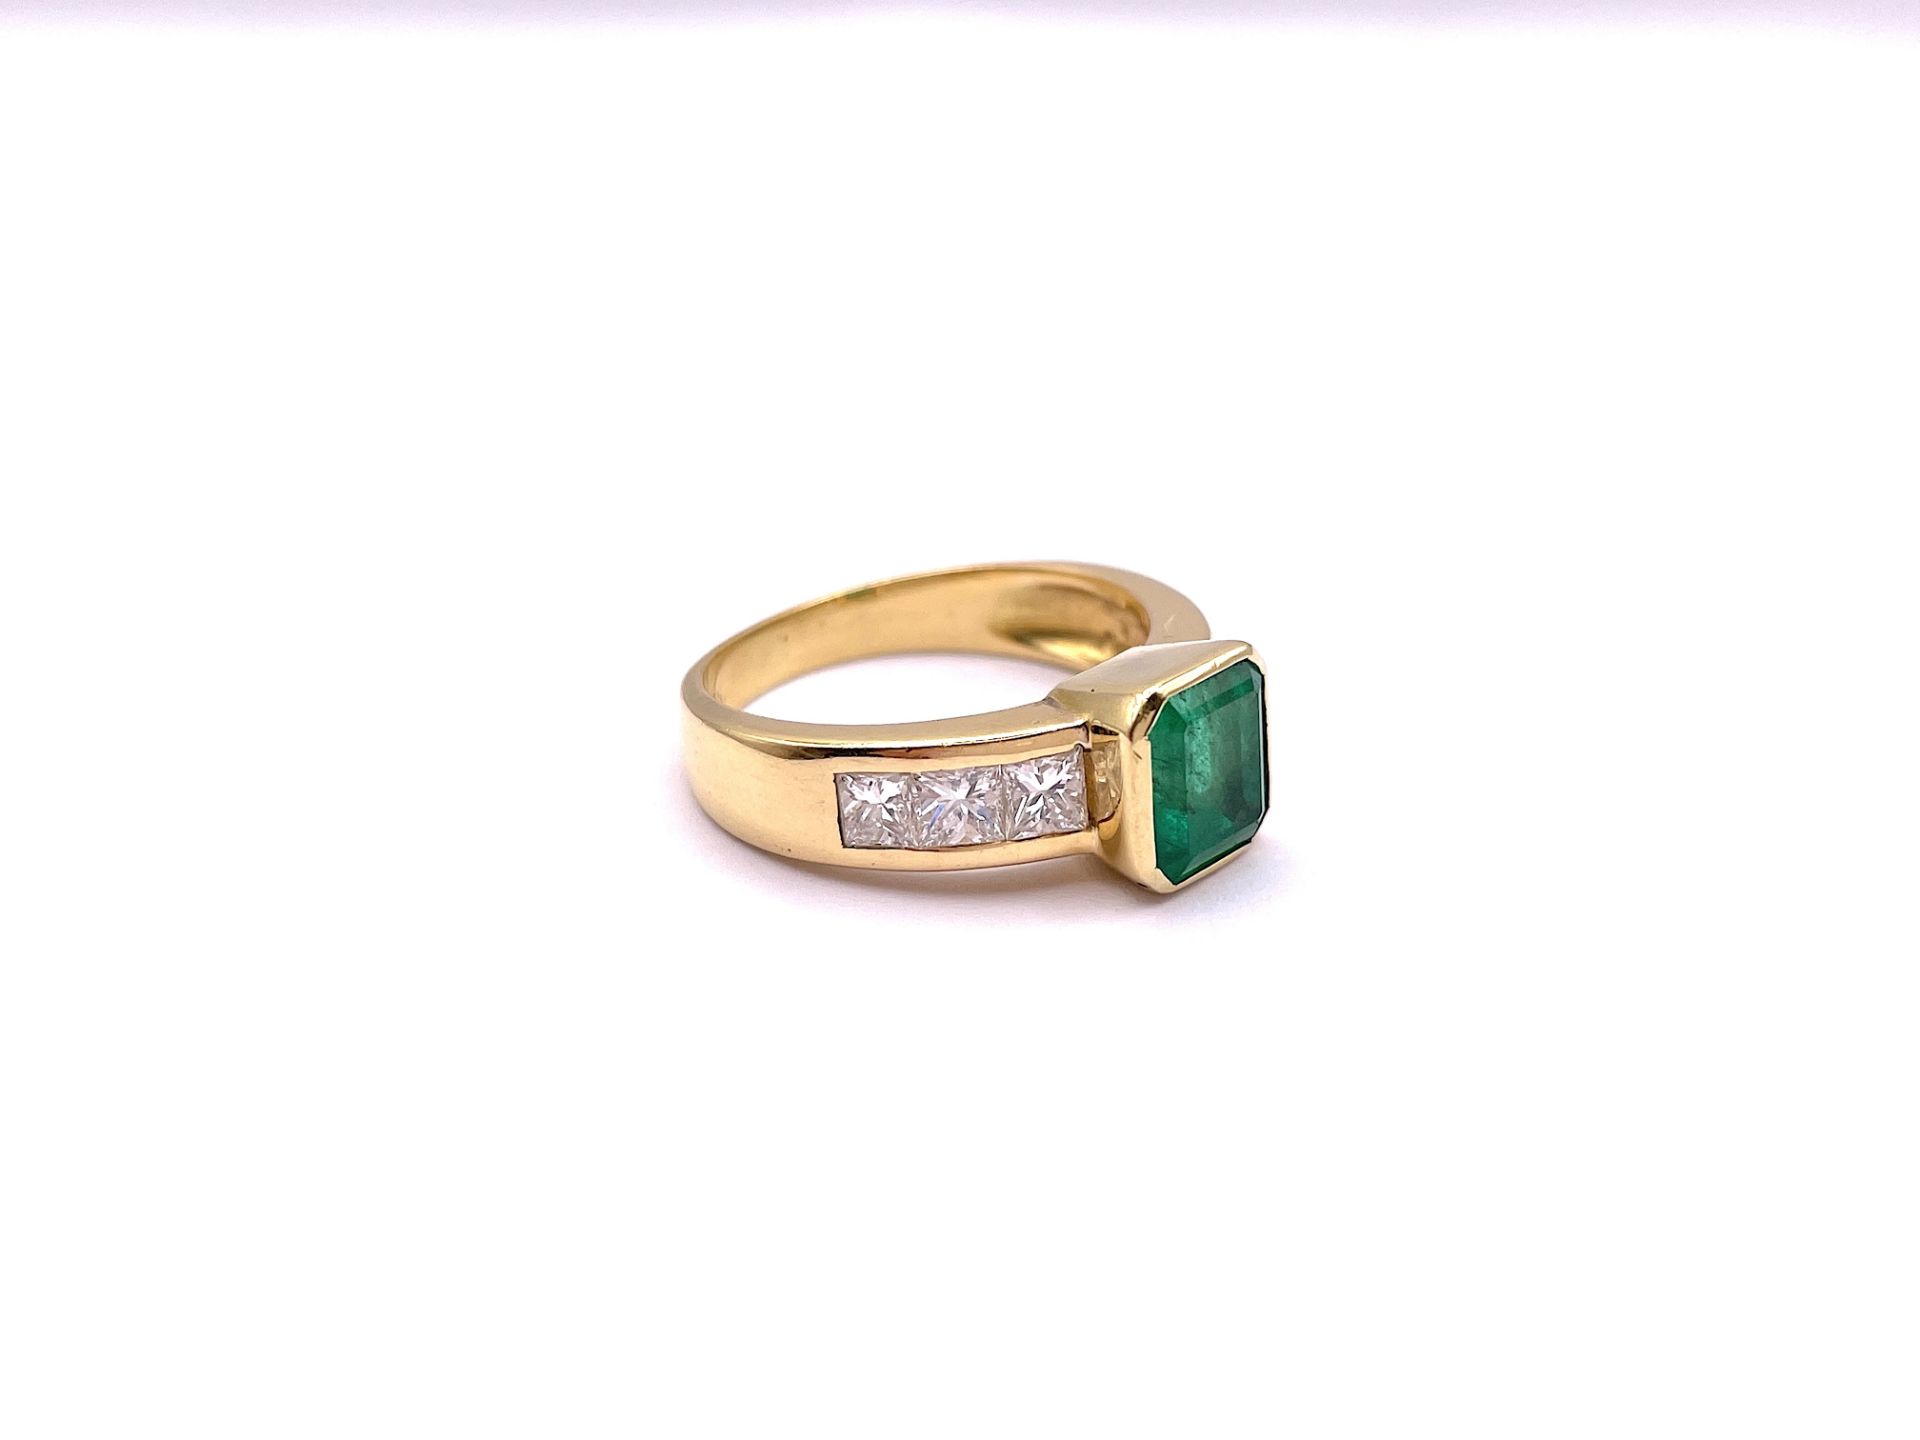 Emerald ring - Image 2 of 5